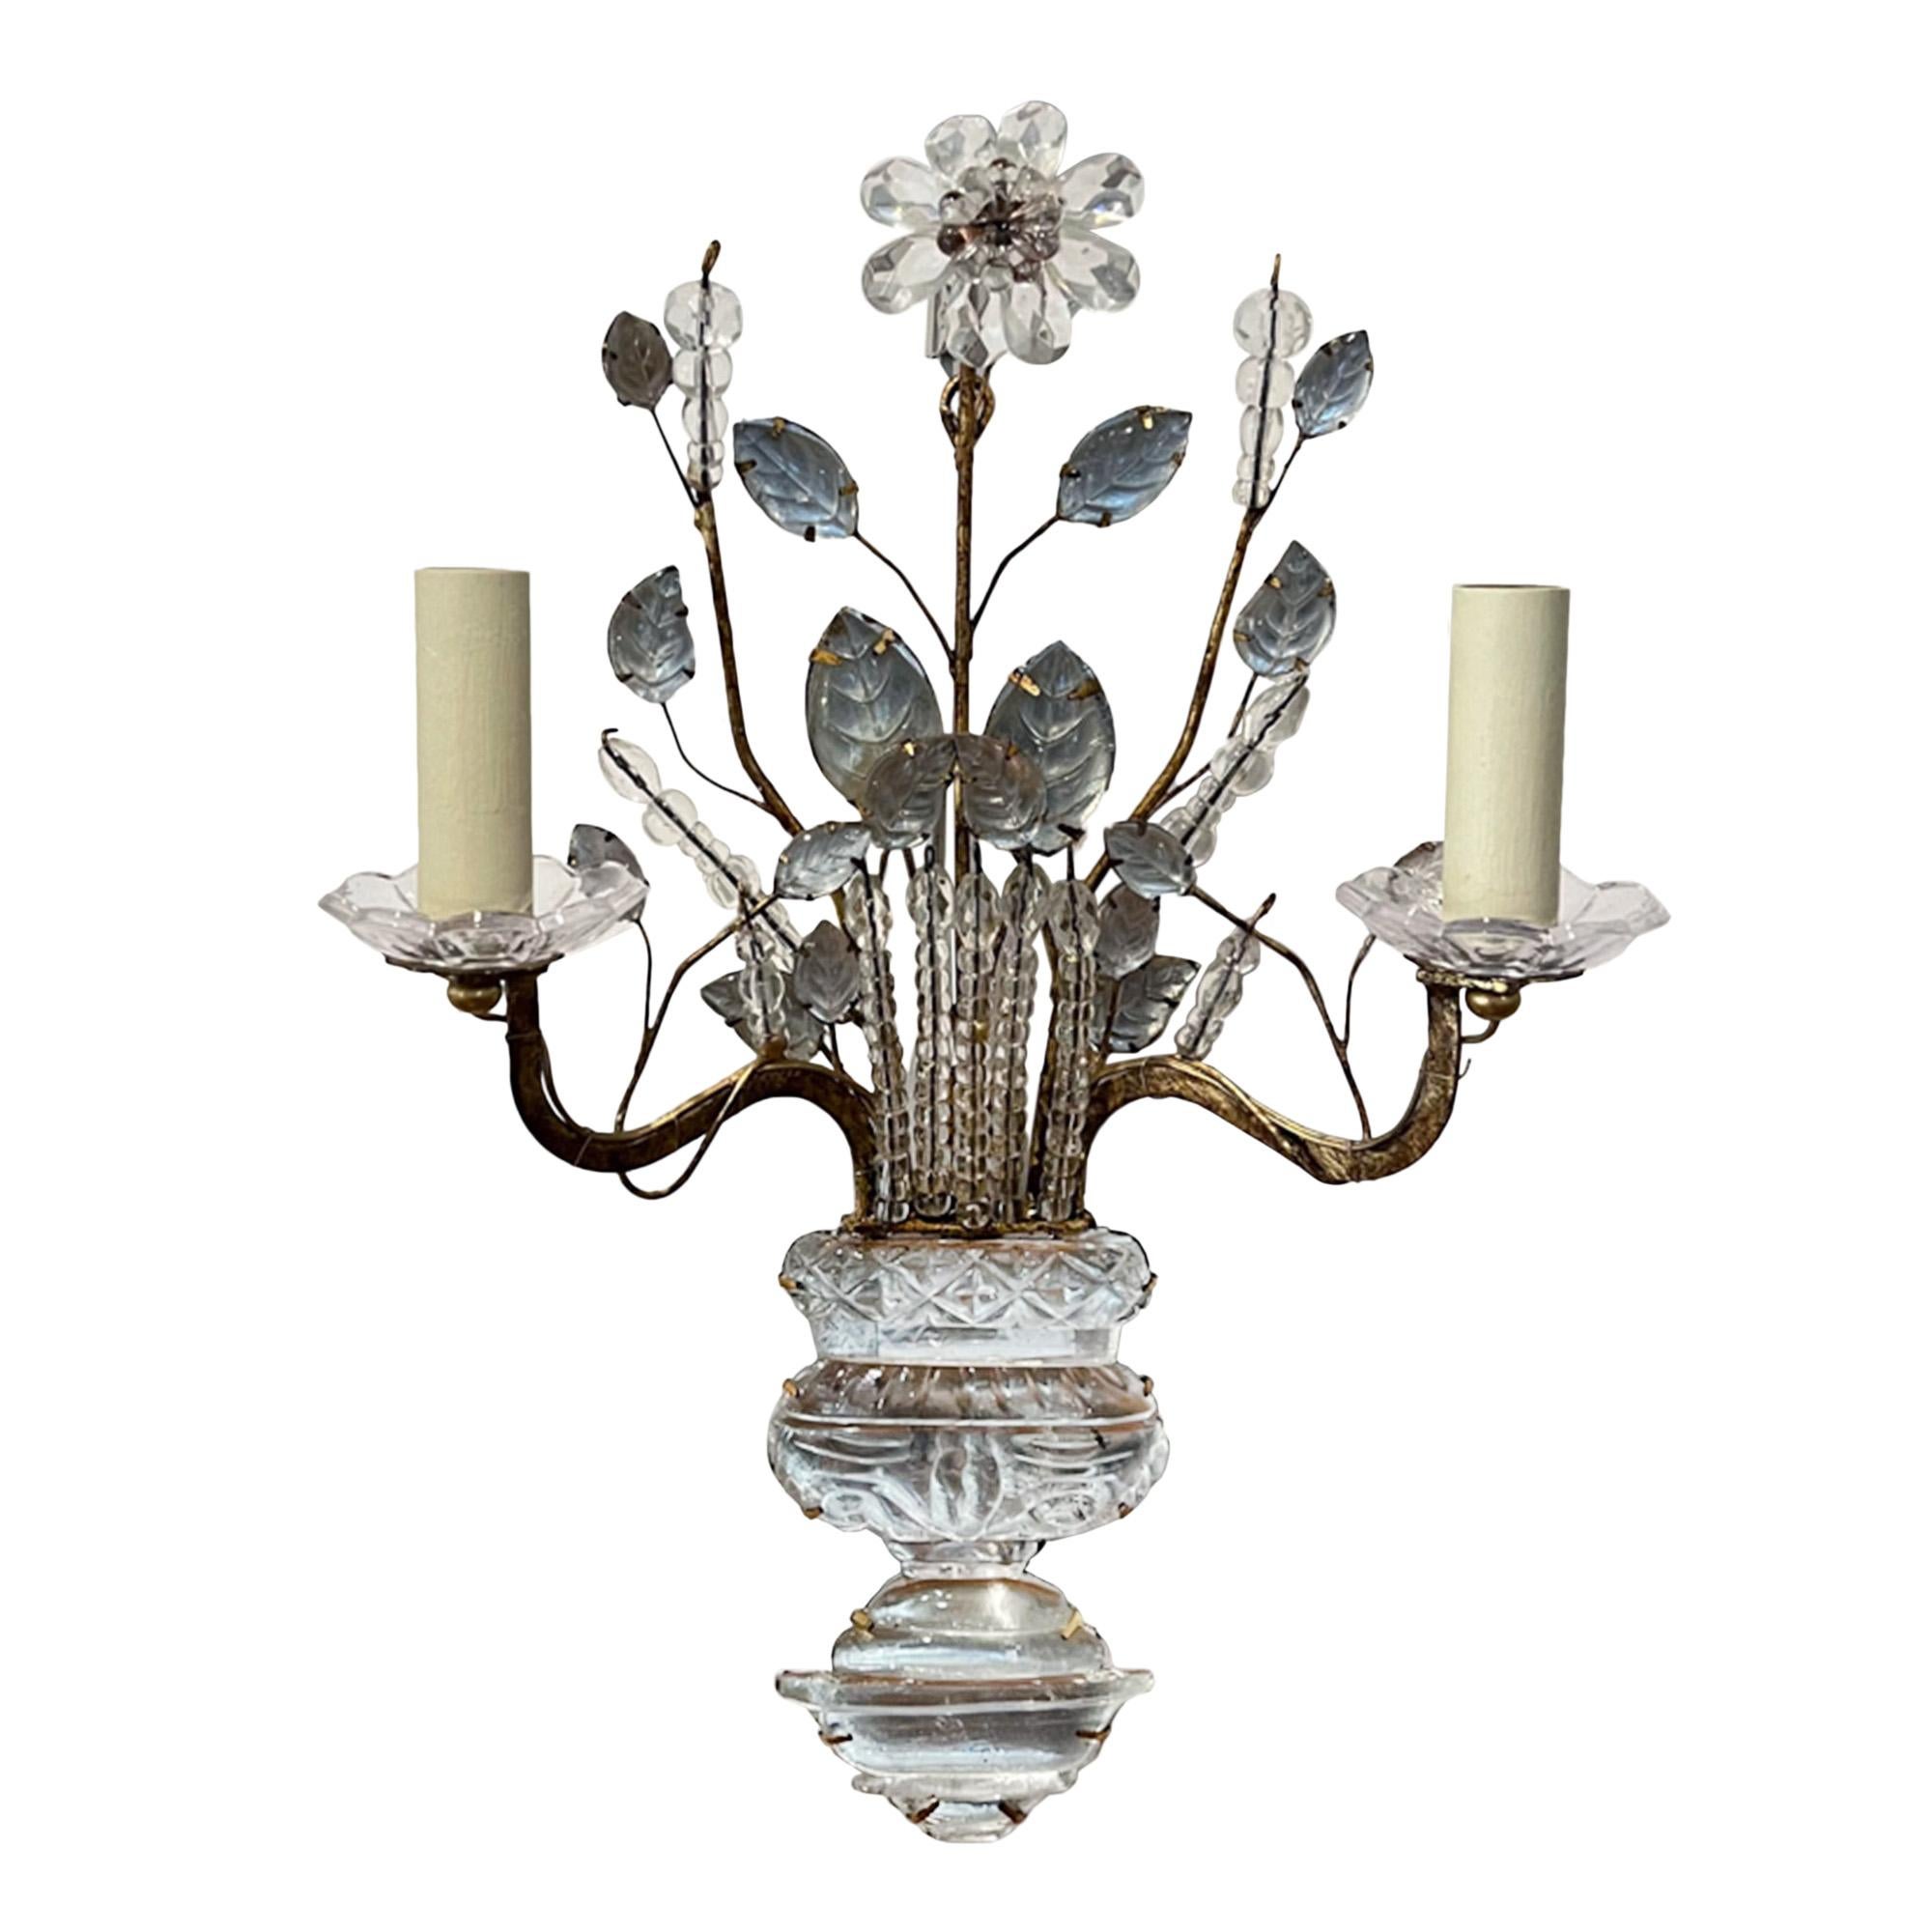 A beautiful set of four wall sconces made in the style of Maison Baguès in France in the 1960s. 

Hand crafted with gilt metal and glass, these wall lights are highly decorative with intricate detail of flowers, leaves and urns. 

We've wired these